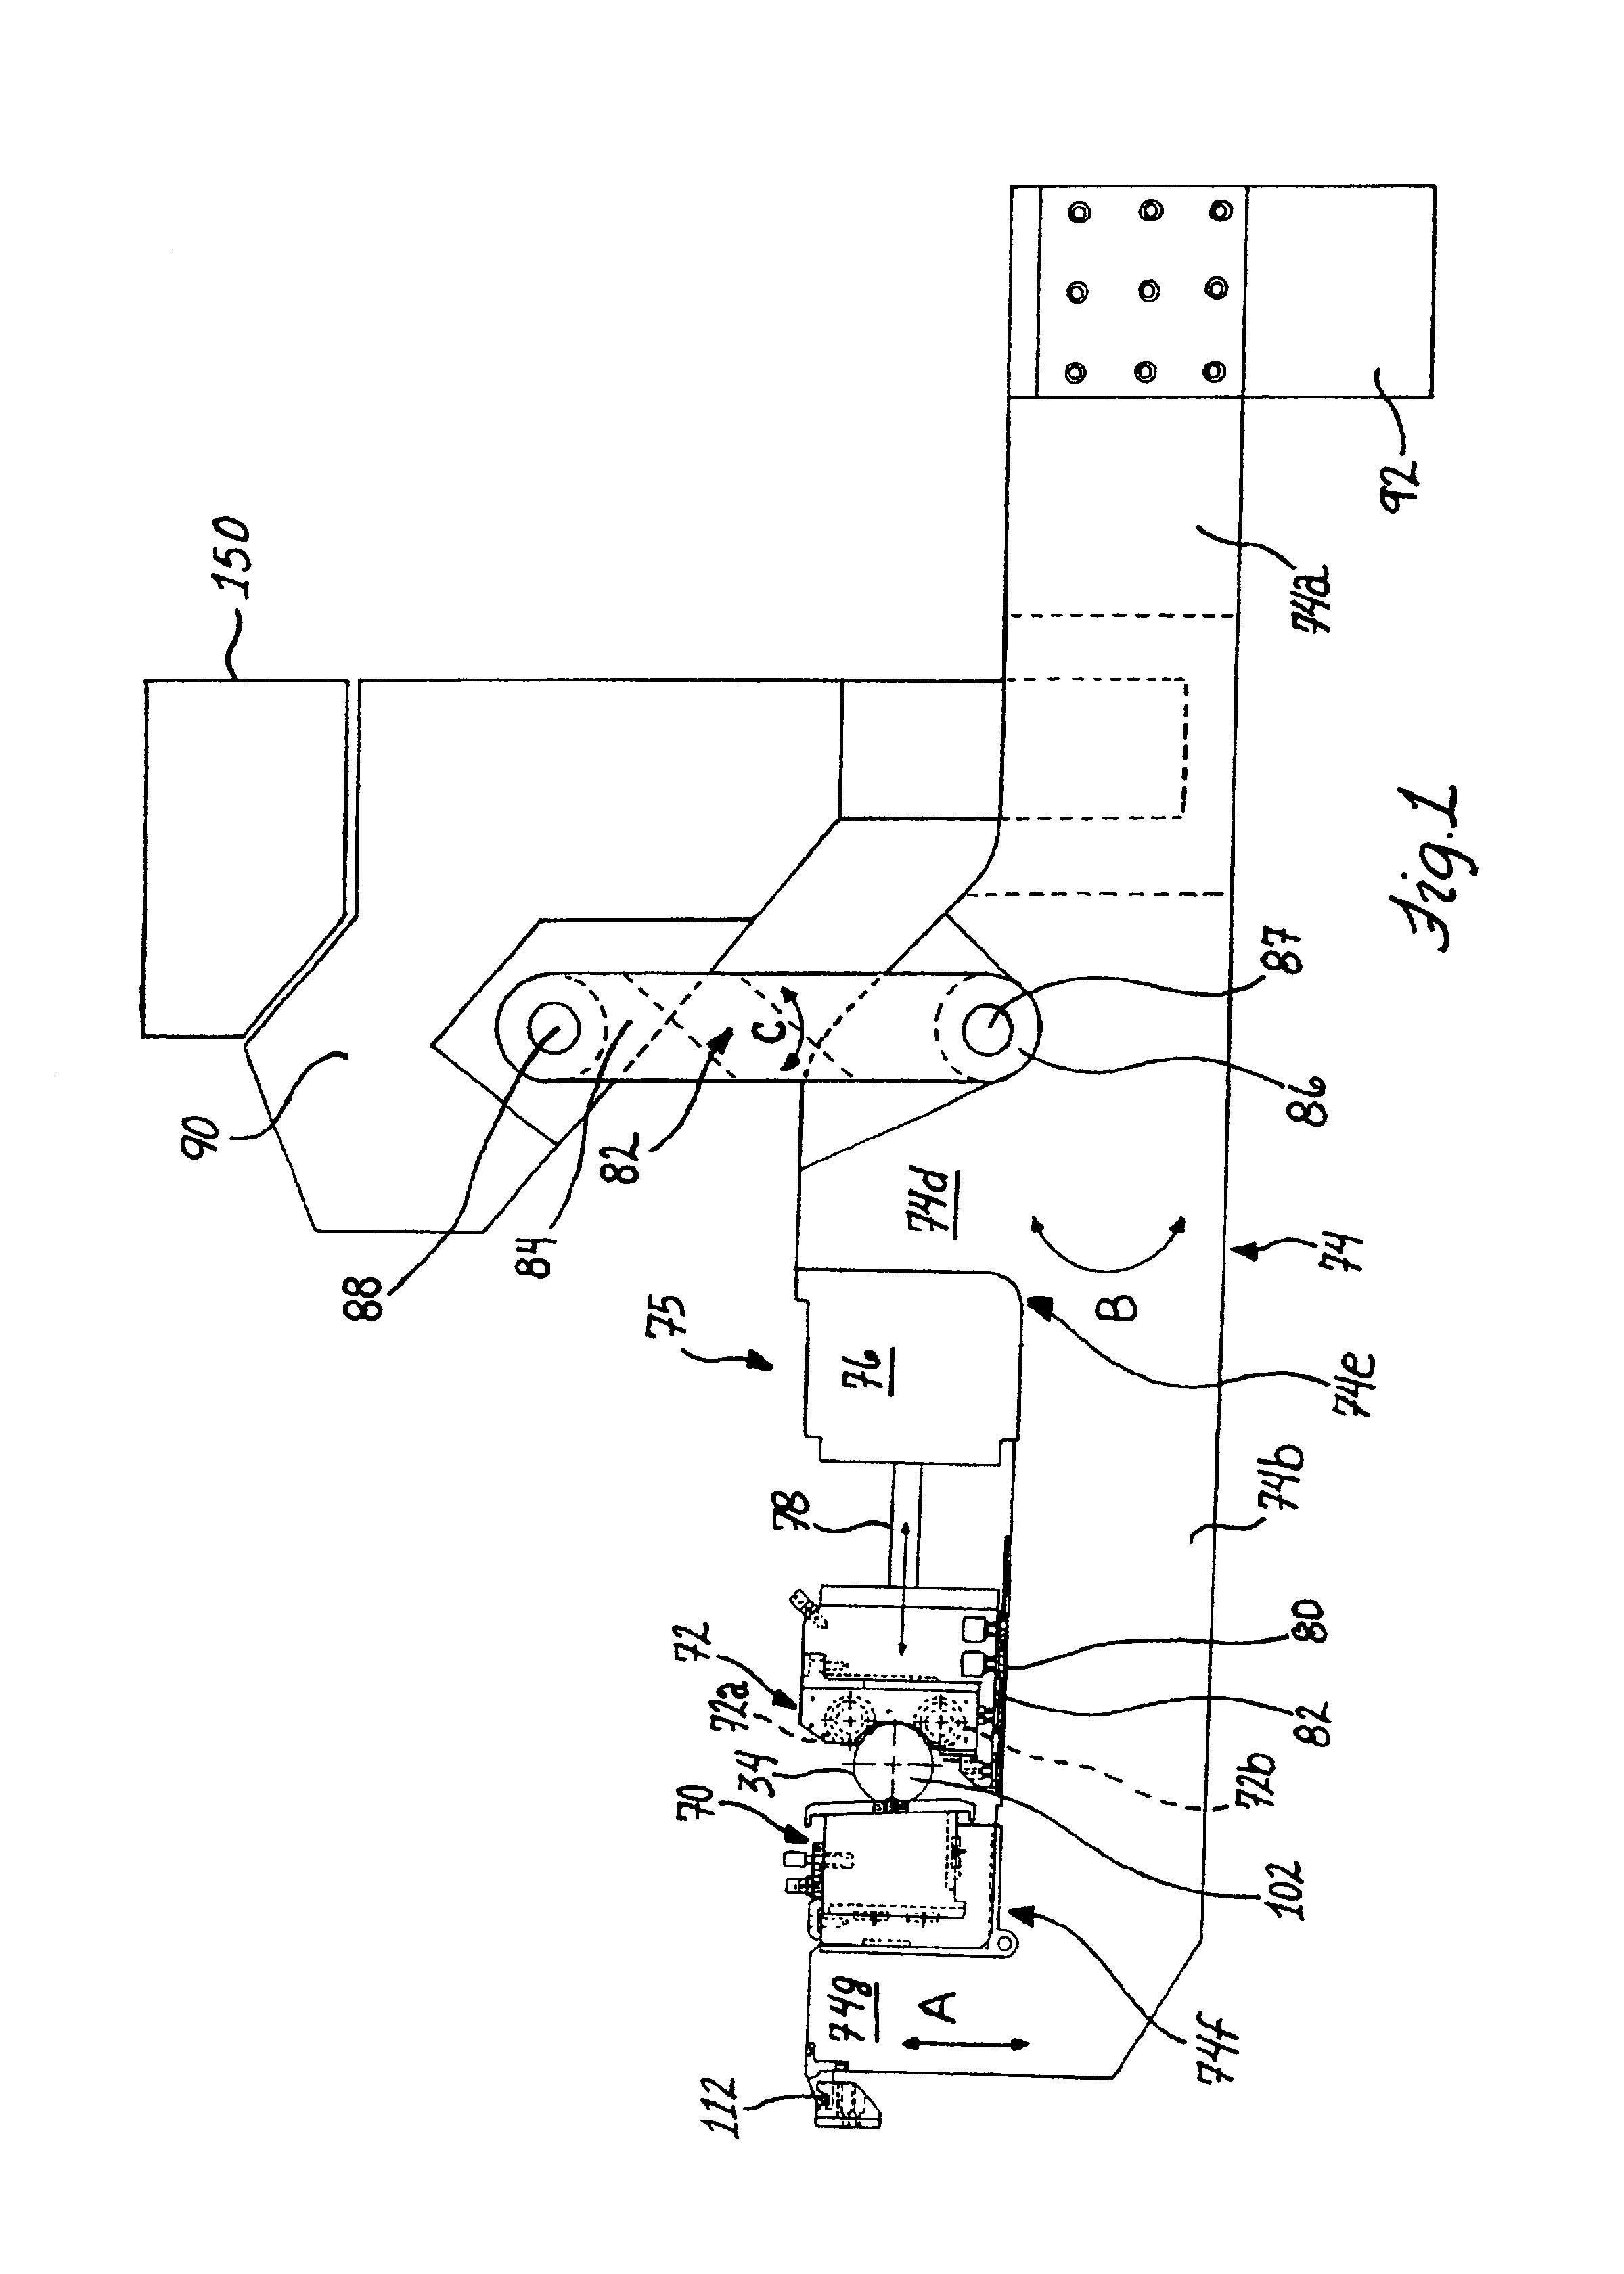 Apparatus and method for rolling workpieces